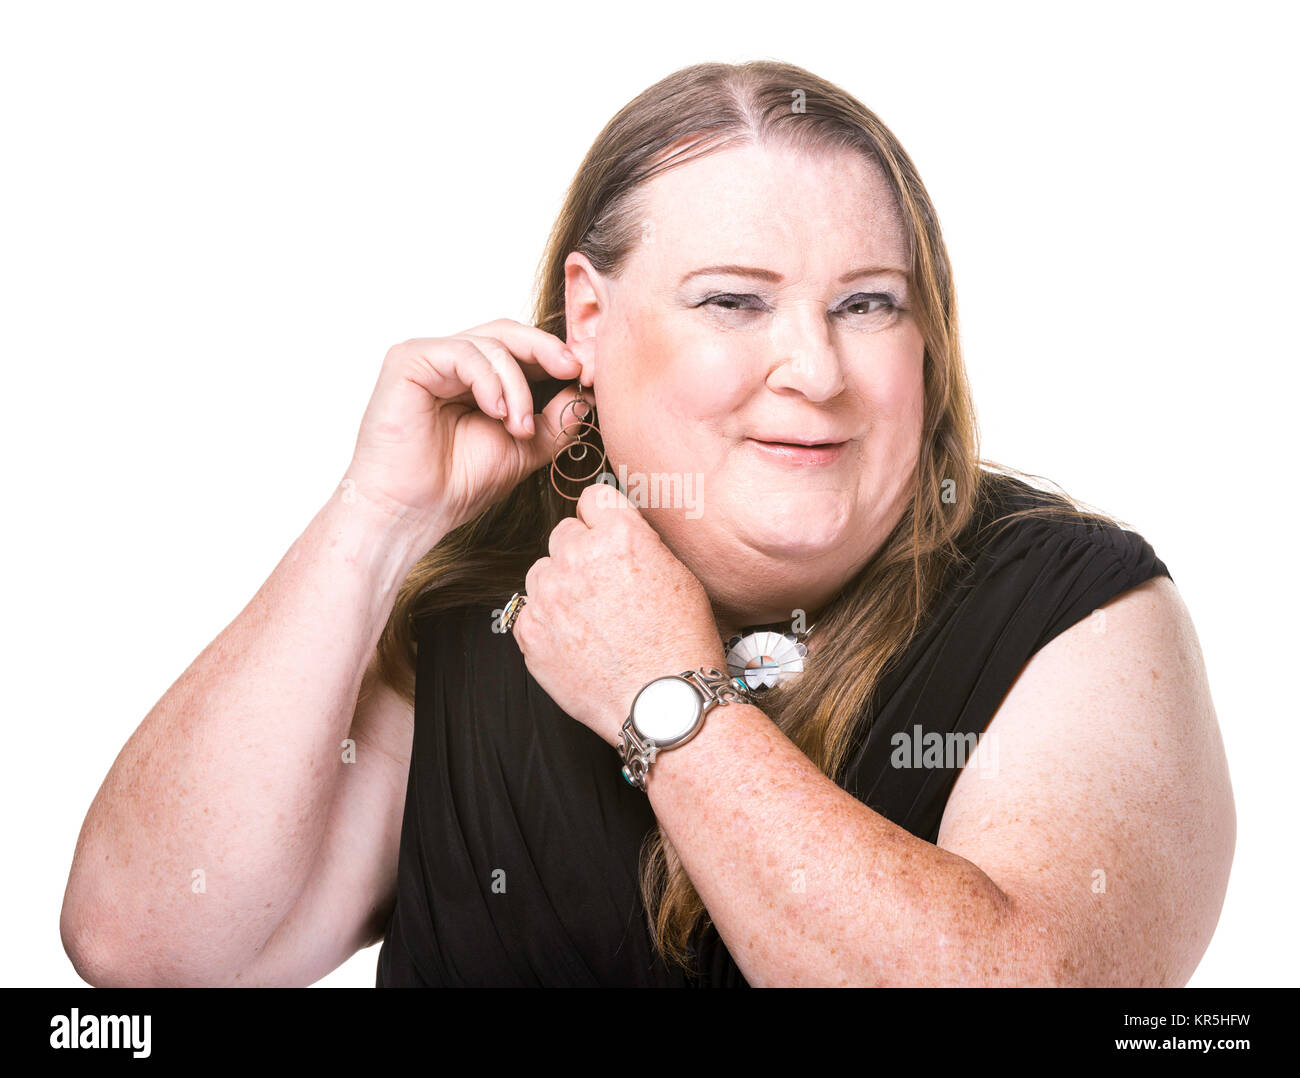 Closeup of Transgender Woman Adjusting and Earring Stock Photo